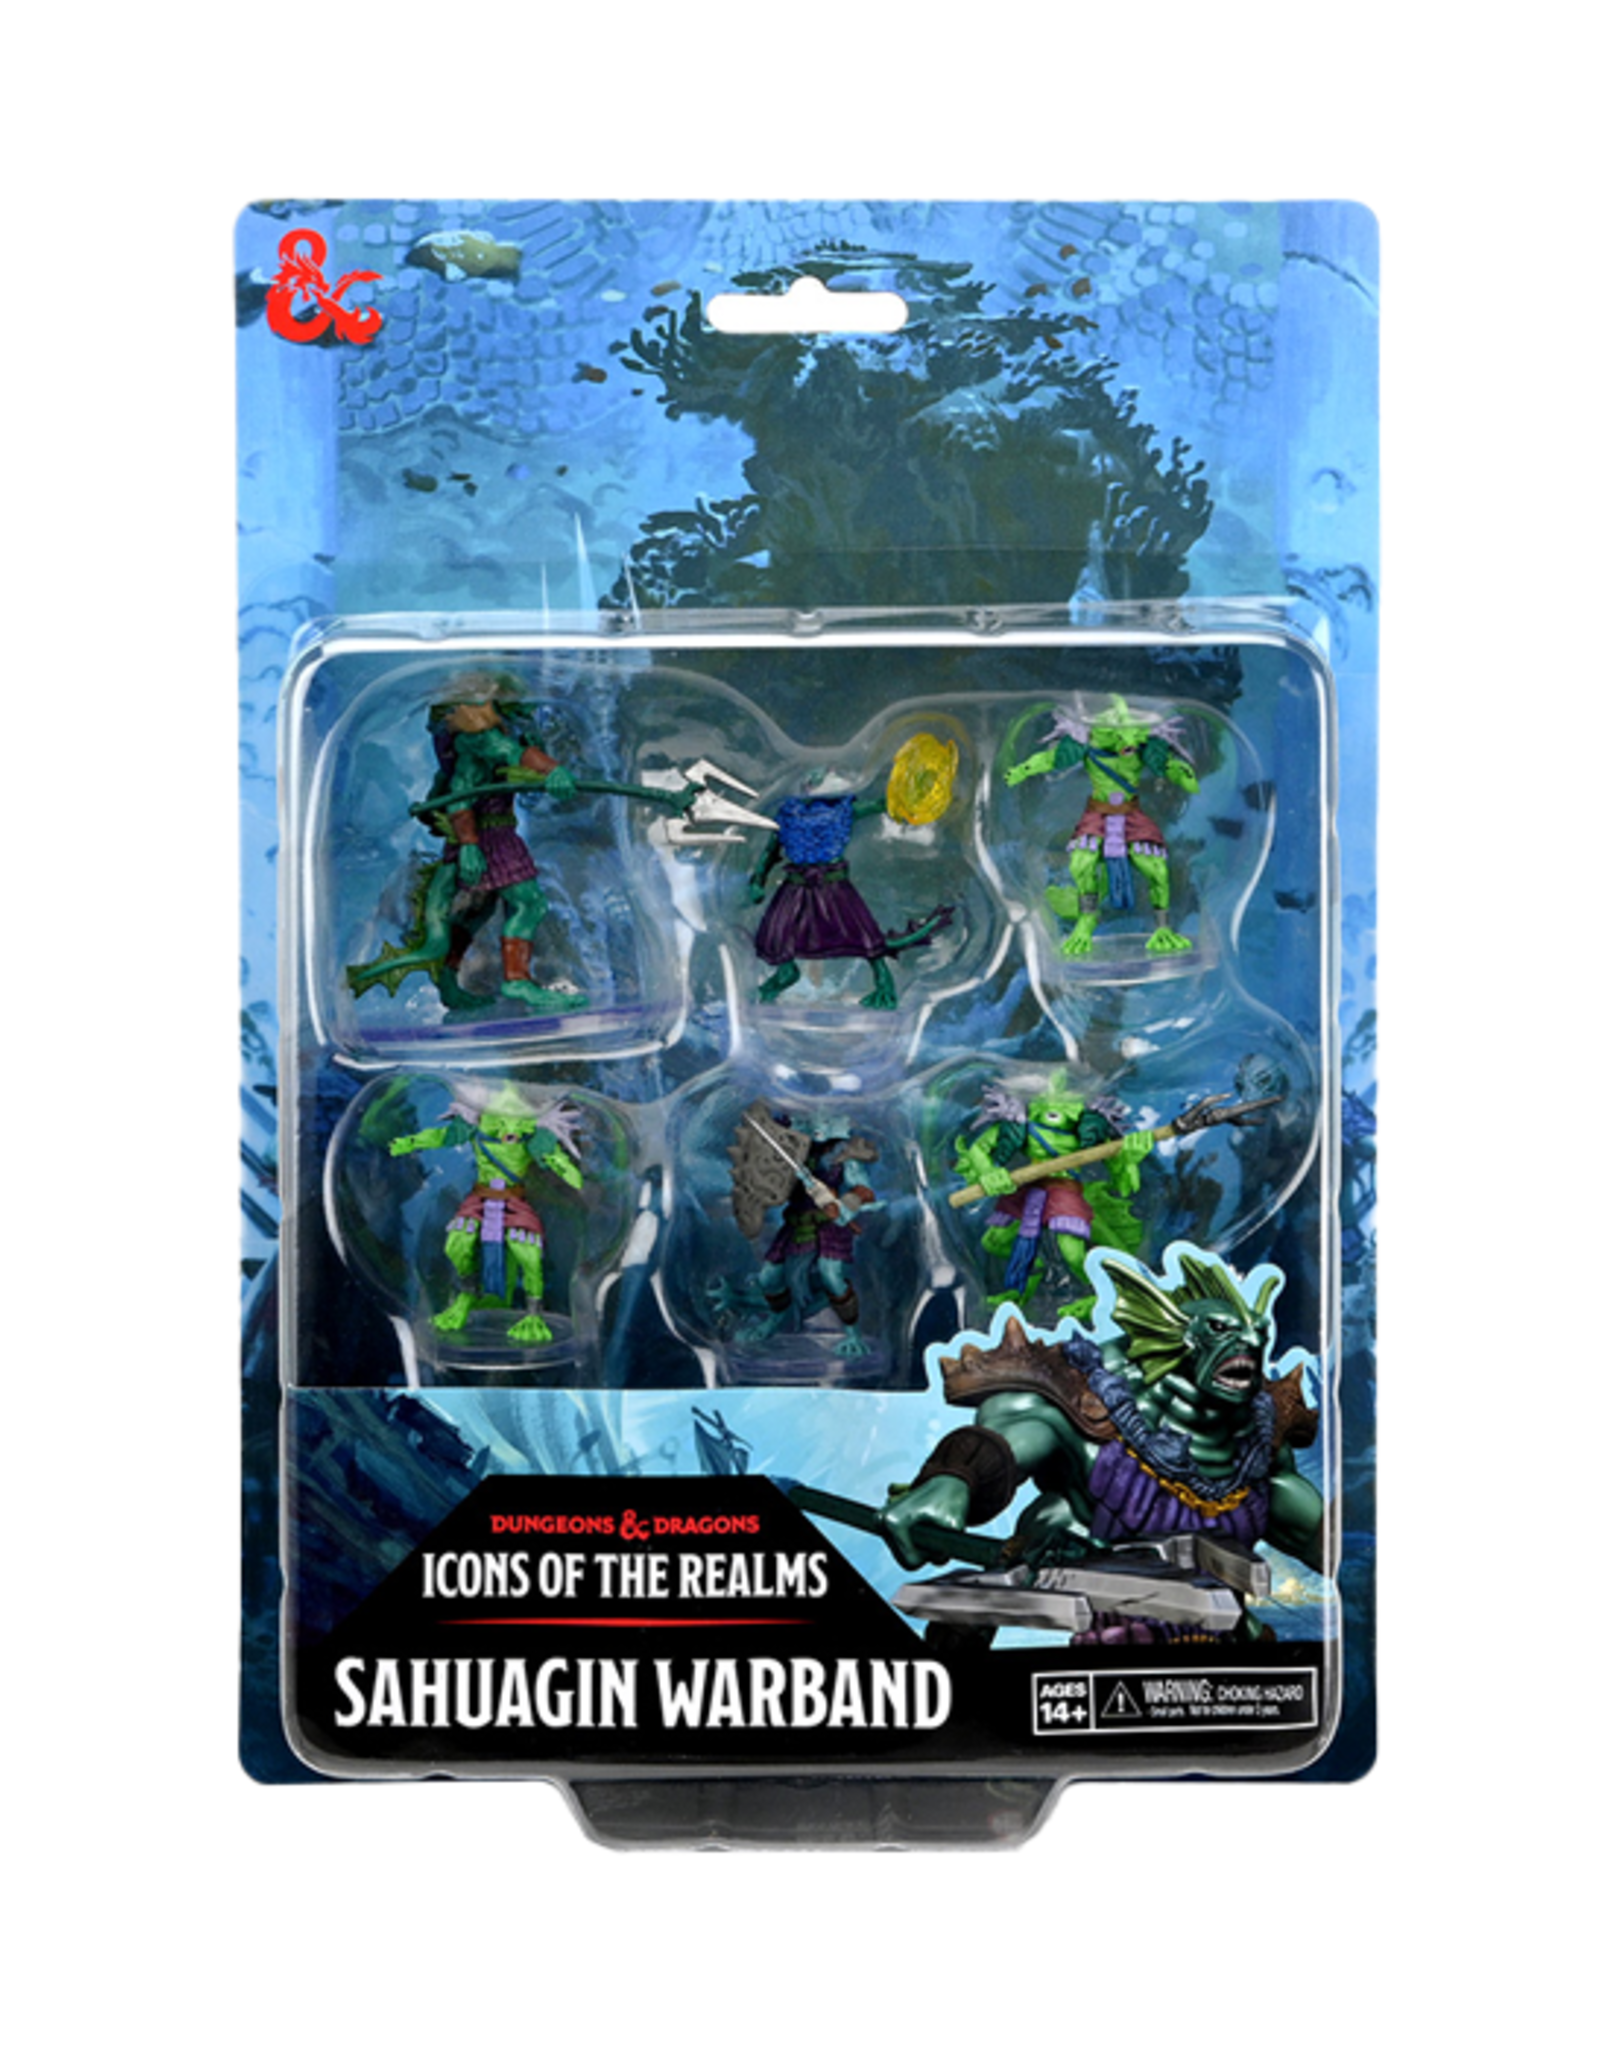 Dungeons & Dragons Dungeons & Dragons: Icons of the Realms - Sahuagun Warband